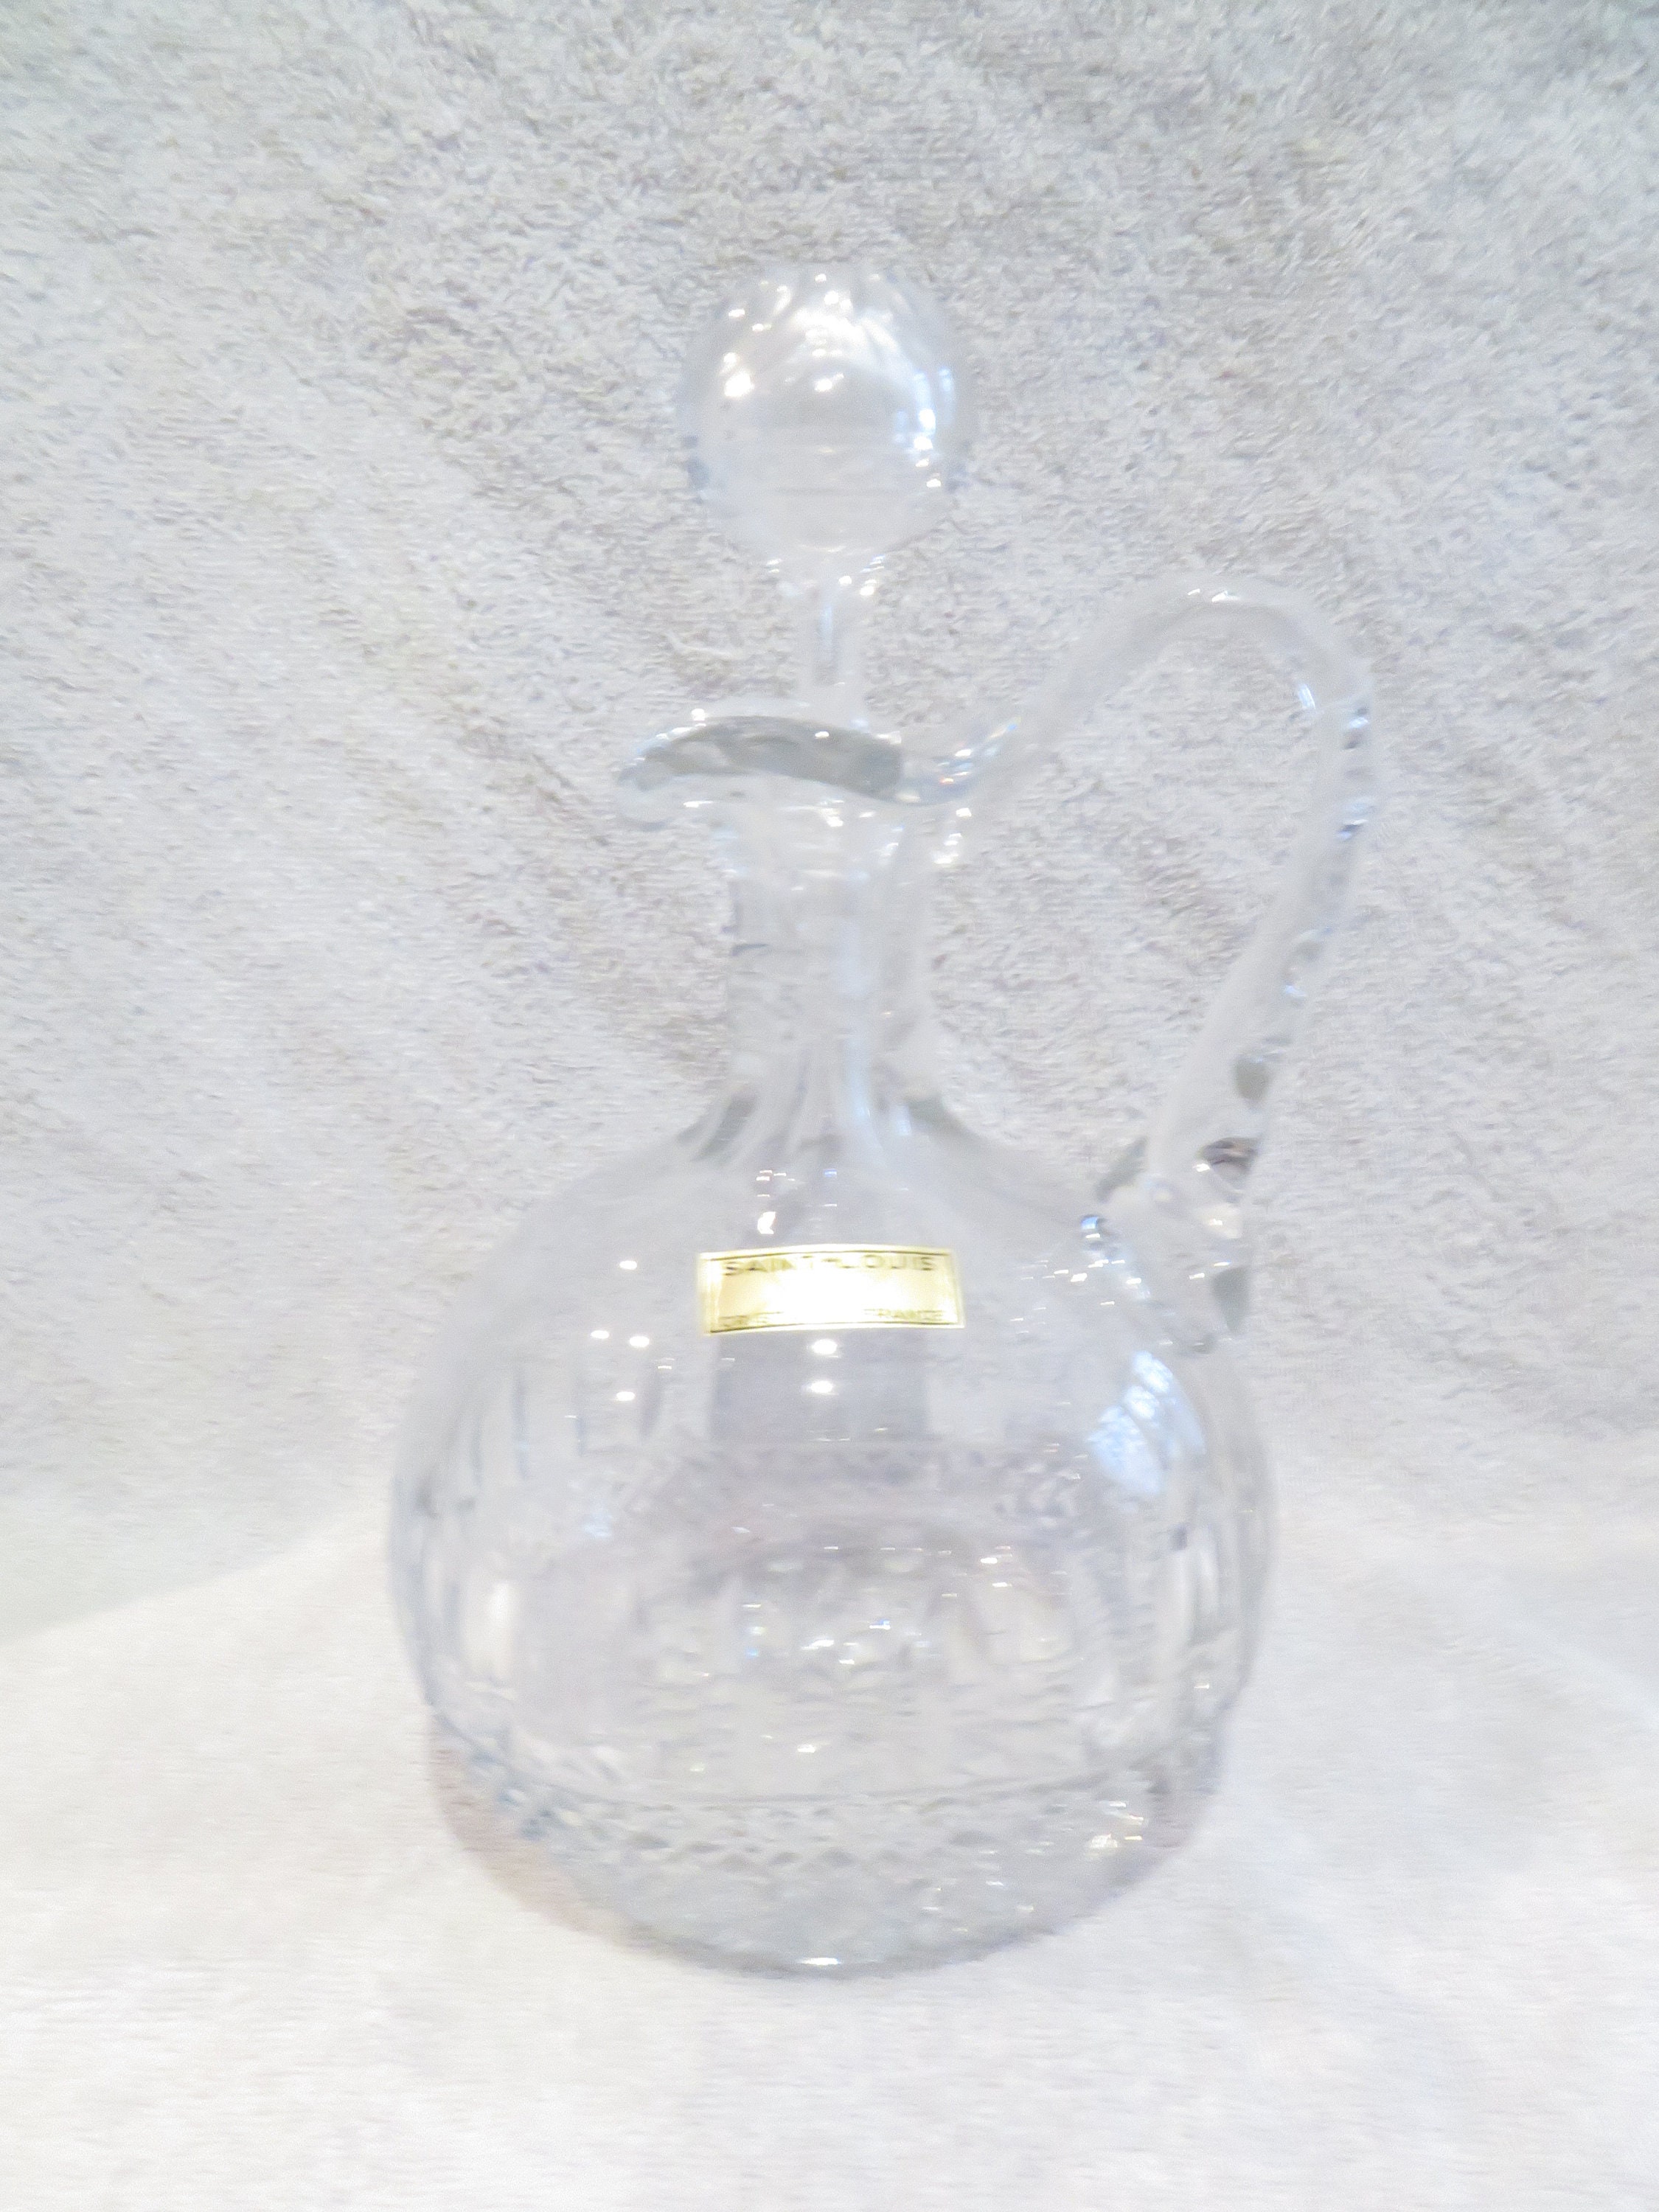 TOMMY WINE DECANTER WITH A HANDLE